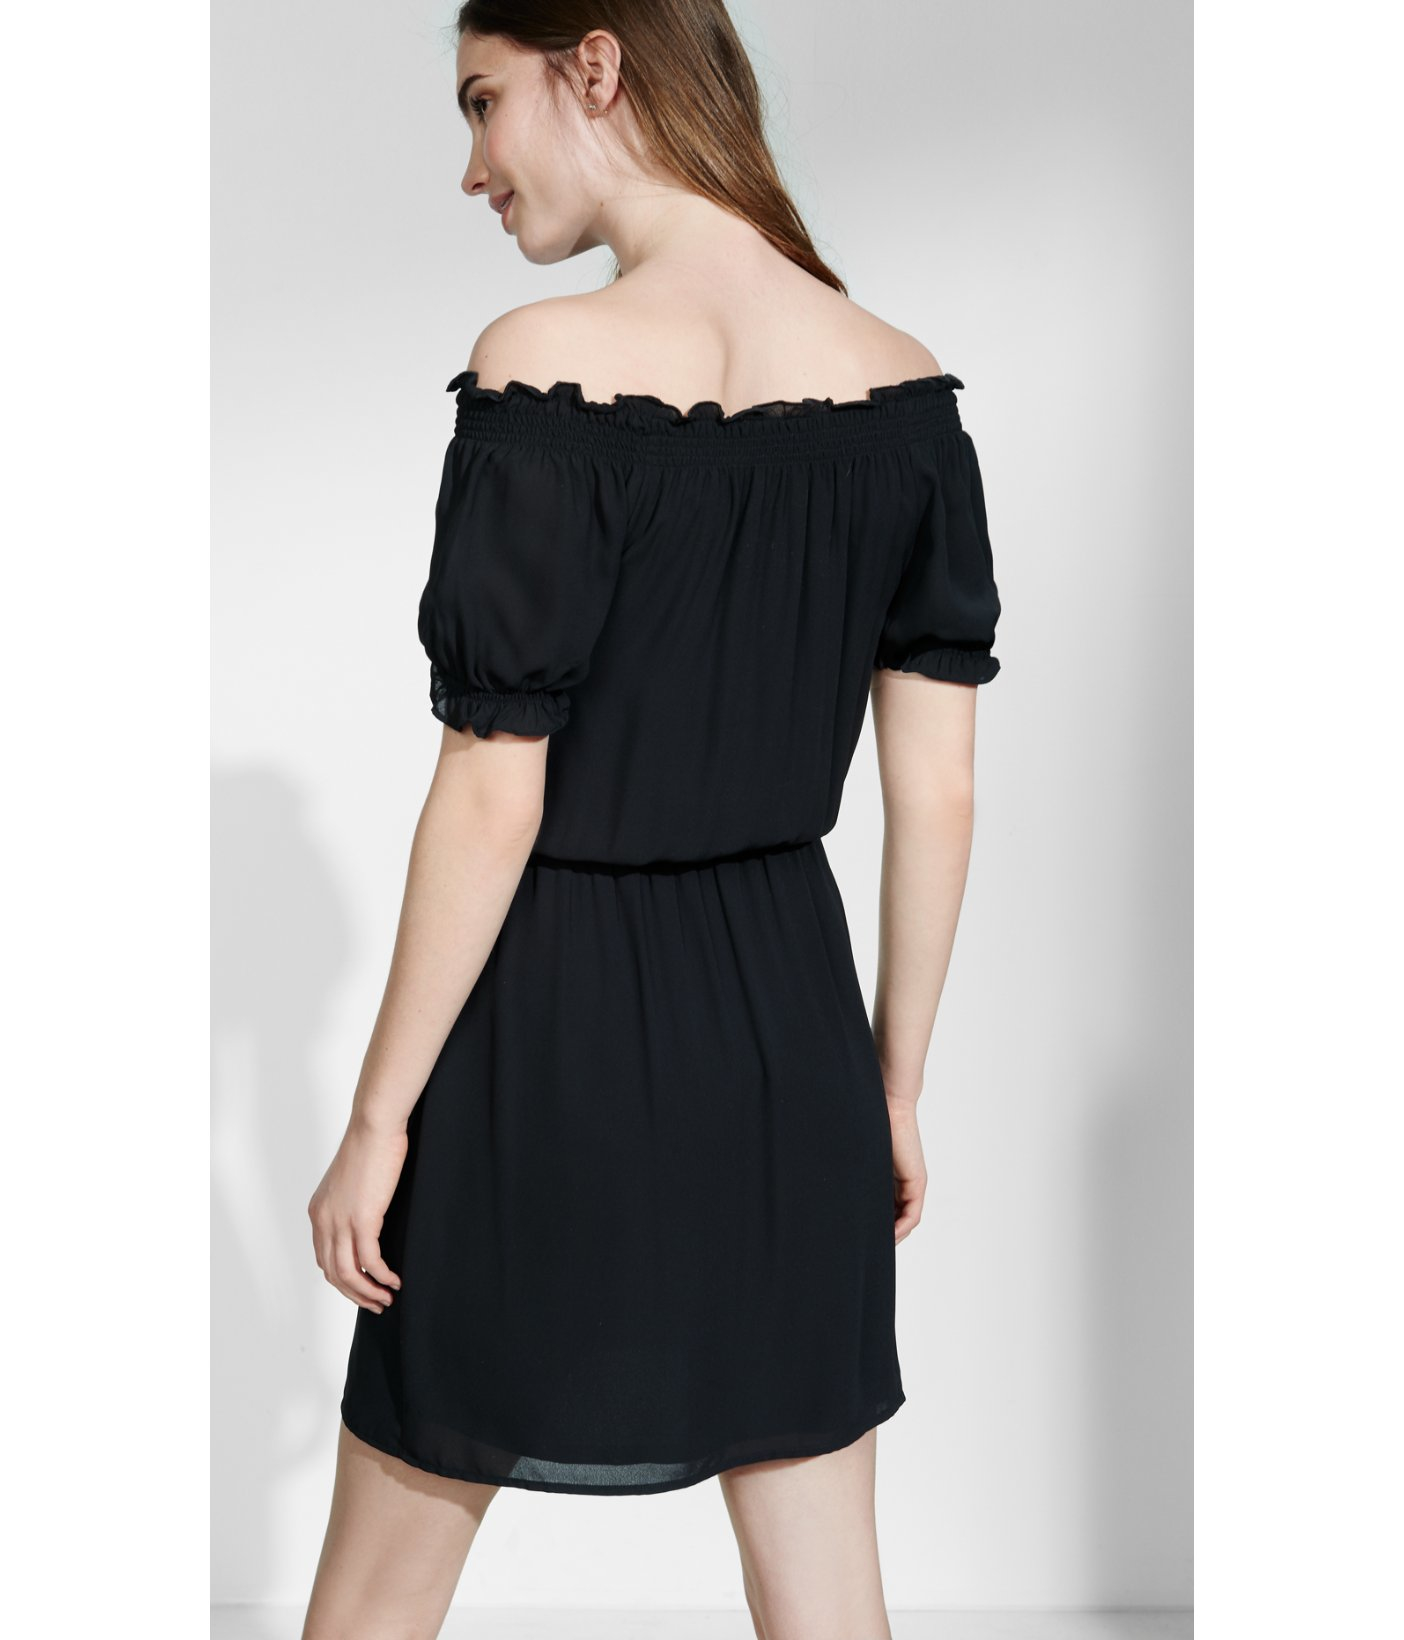 Smocked off the shoulder bodycon dress, Black sweater with elbow patches, neck designs for kurtis with collar. 